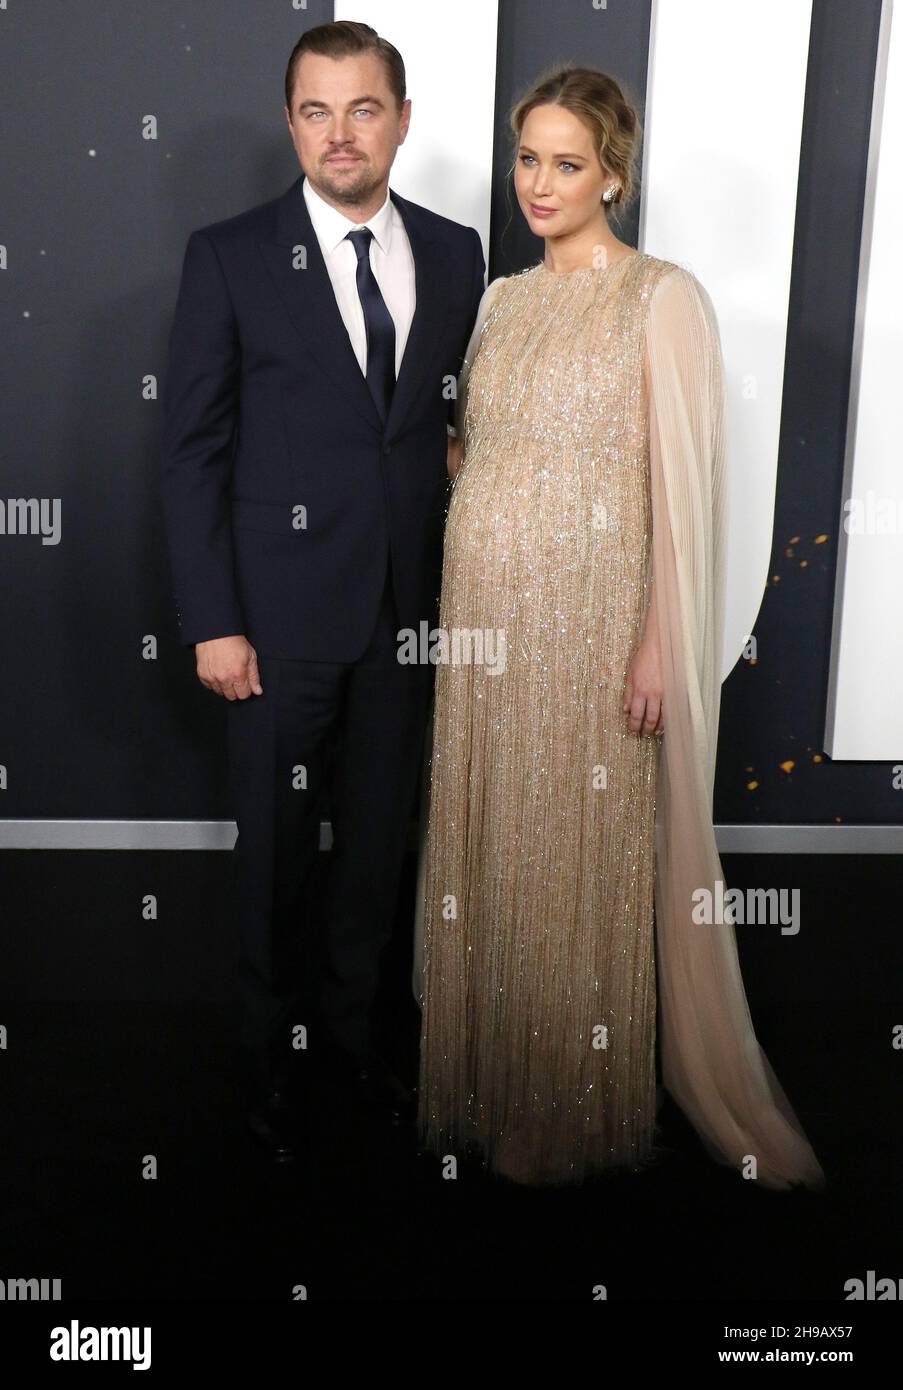 New York, NY, USA. 5th Dec, 2021. Leonardo DiCaprio and Jennifer Lawrence at the Netflix World Premiere Of Don't Look Up at Jazz At Lincoln Center in New York City on December 5, 2021. Credit: Rw/Media Punch/Alamy Live News Stock Photo